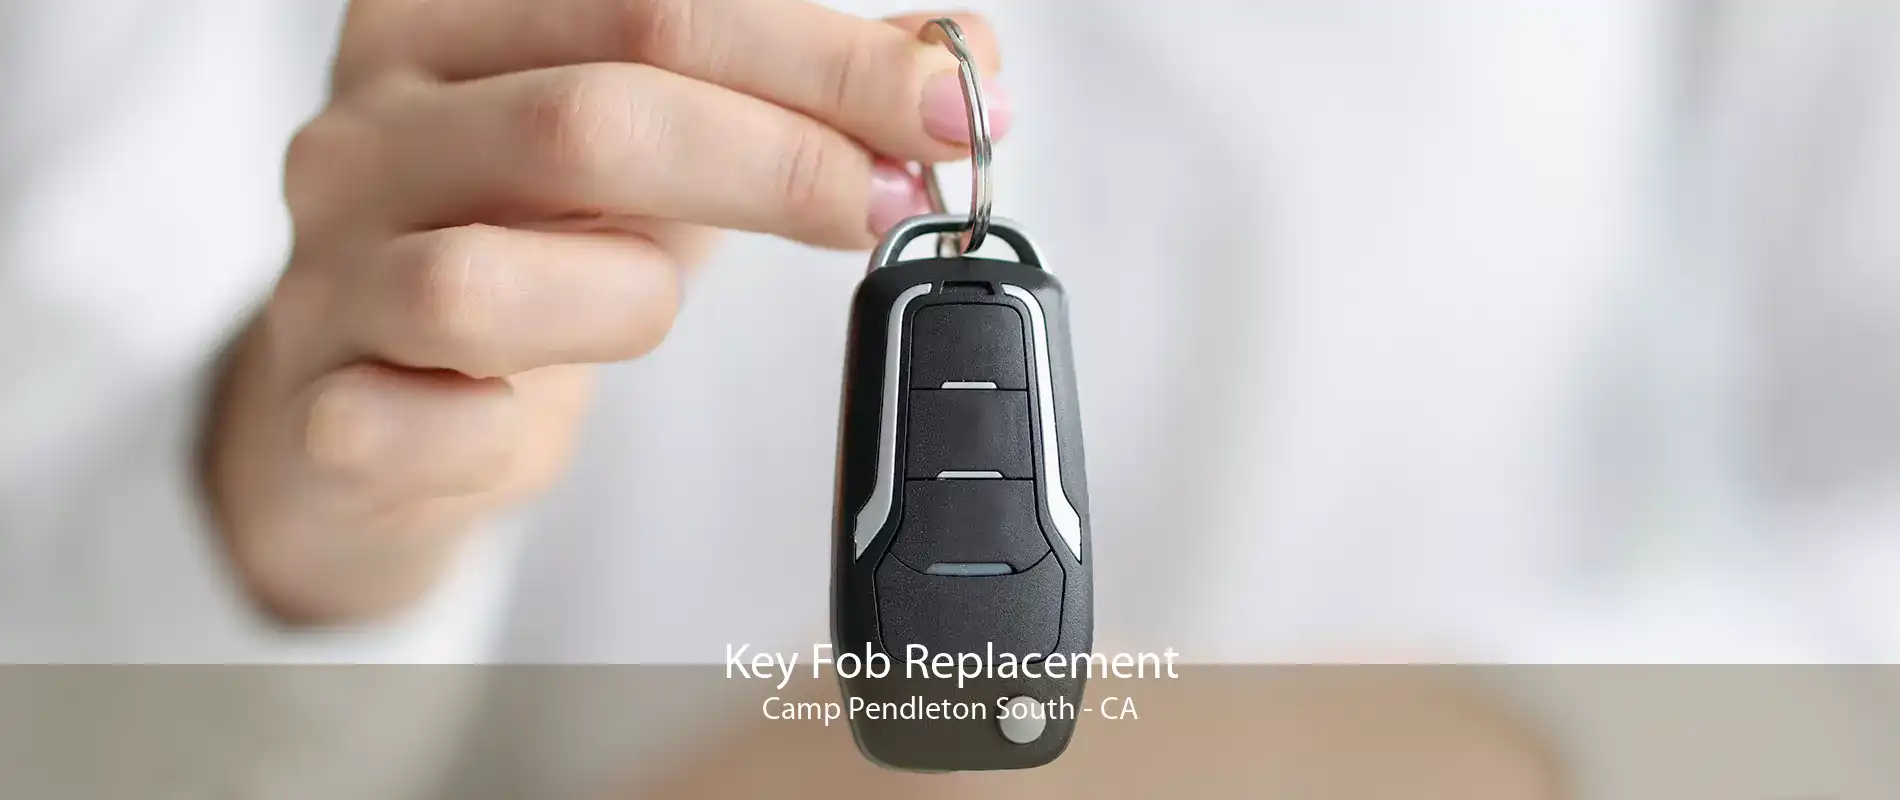 Key Fob Replacement Camp Pendleton South - CA